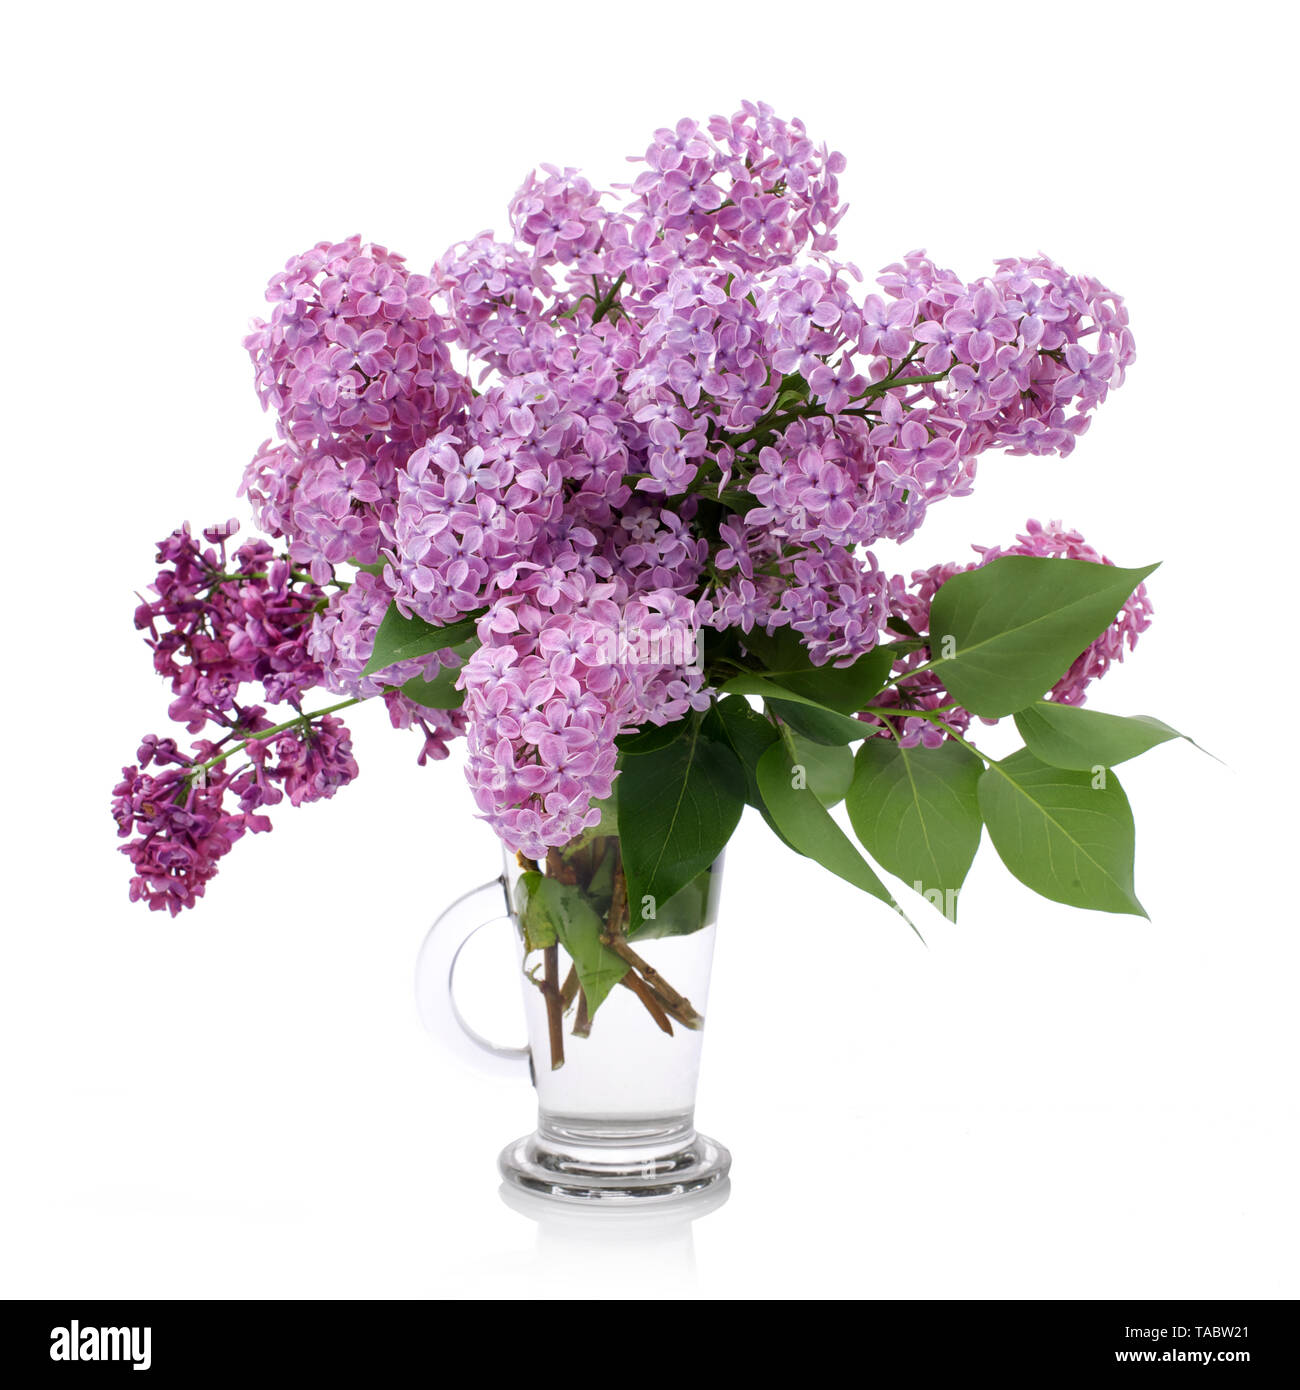 Bouquet of Lilacs in a Glass Vase isolated on white. Branch with Lilac Flowers. Stock Photo